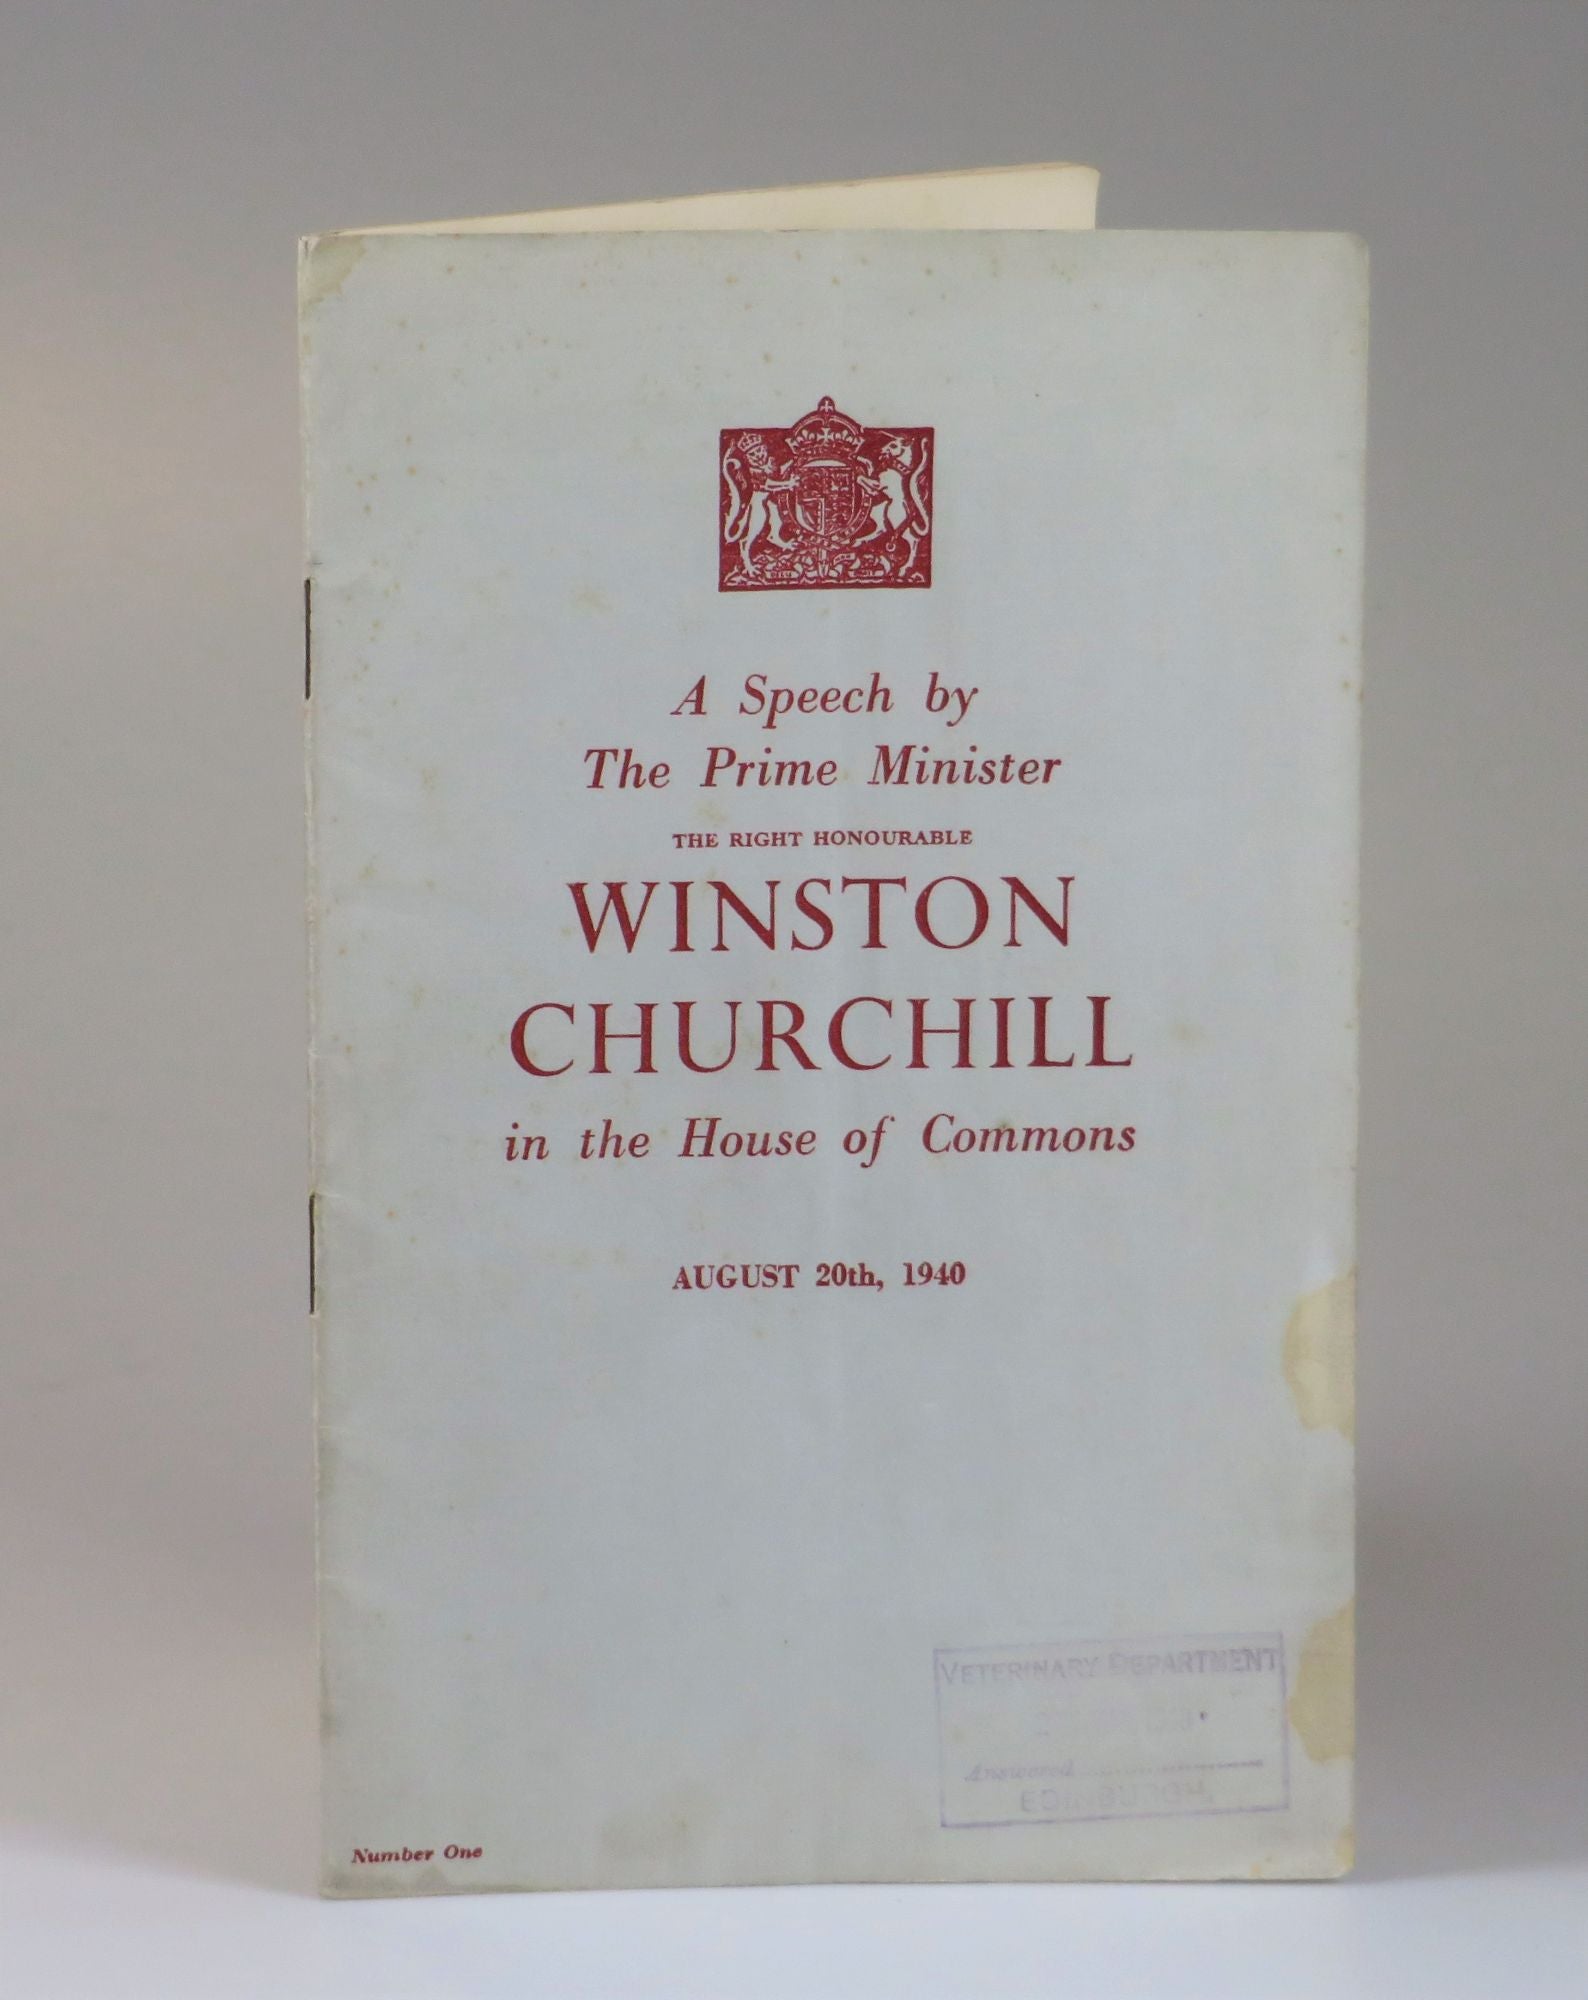 Churchill　Churchill　First　20th,　by　August　S.　Minister　The　in　Prime　Honourable　Winston　1940　The　Commons　Right　Winston　of　the　House　Speech　A　edition